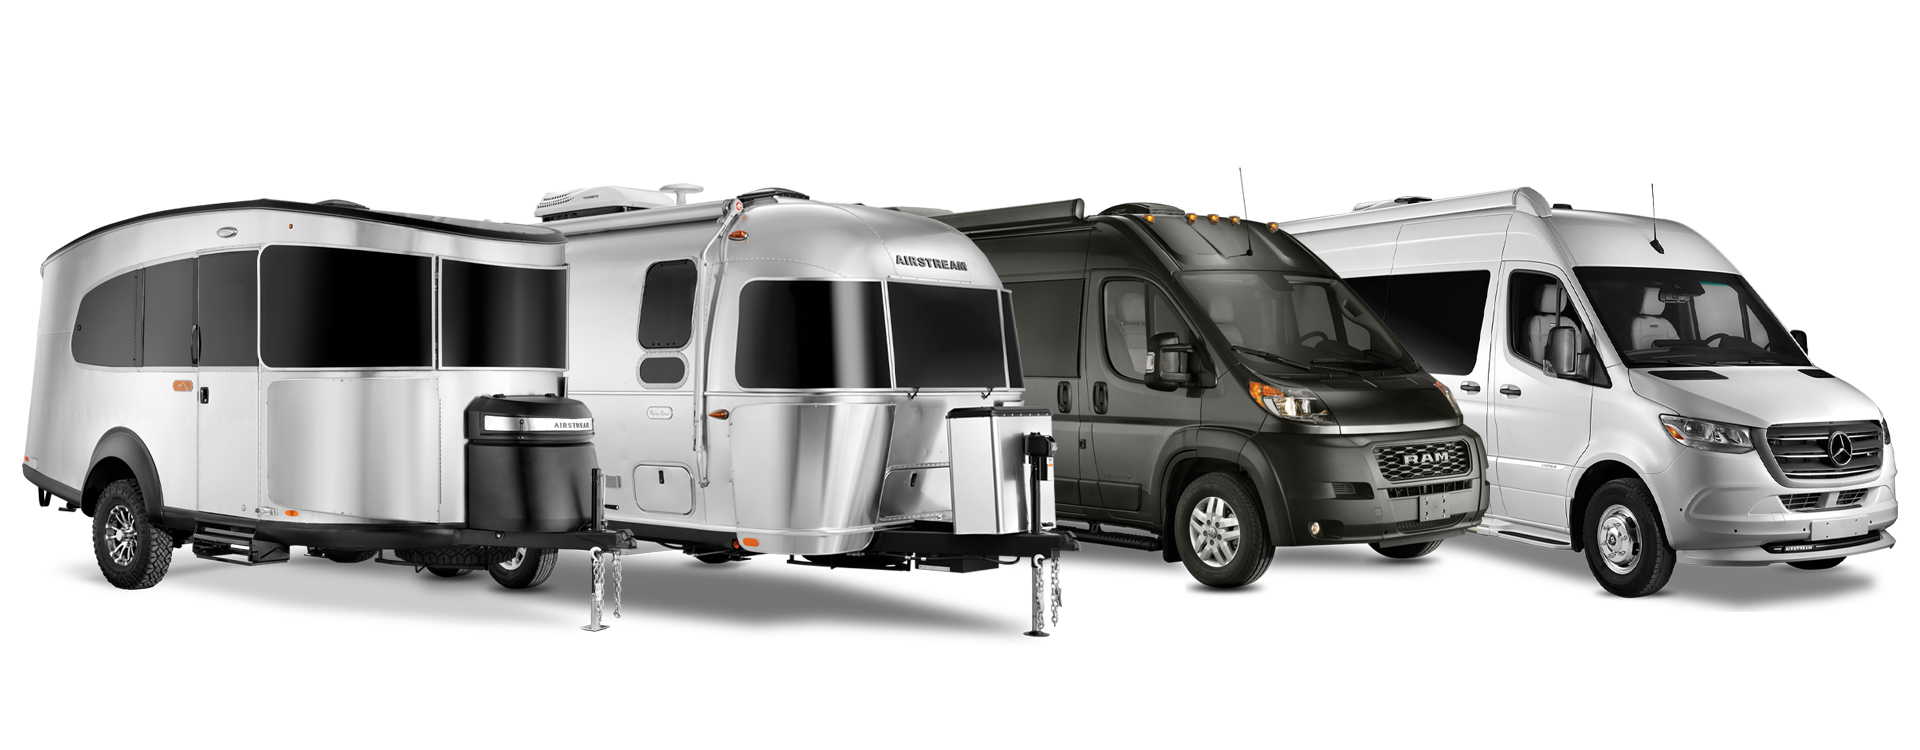 Four Airstream travel trailers and class b motorhomes in a line on a white background.